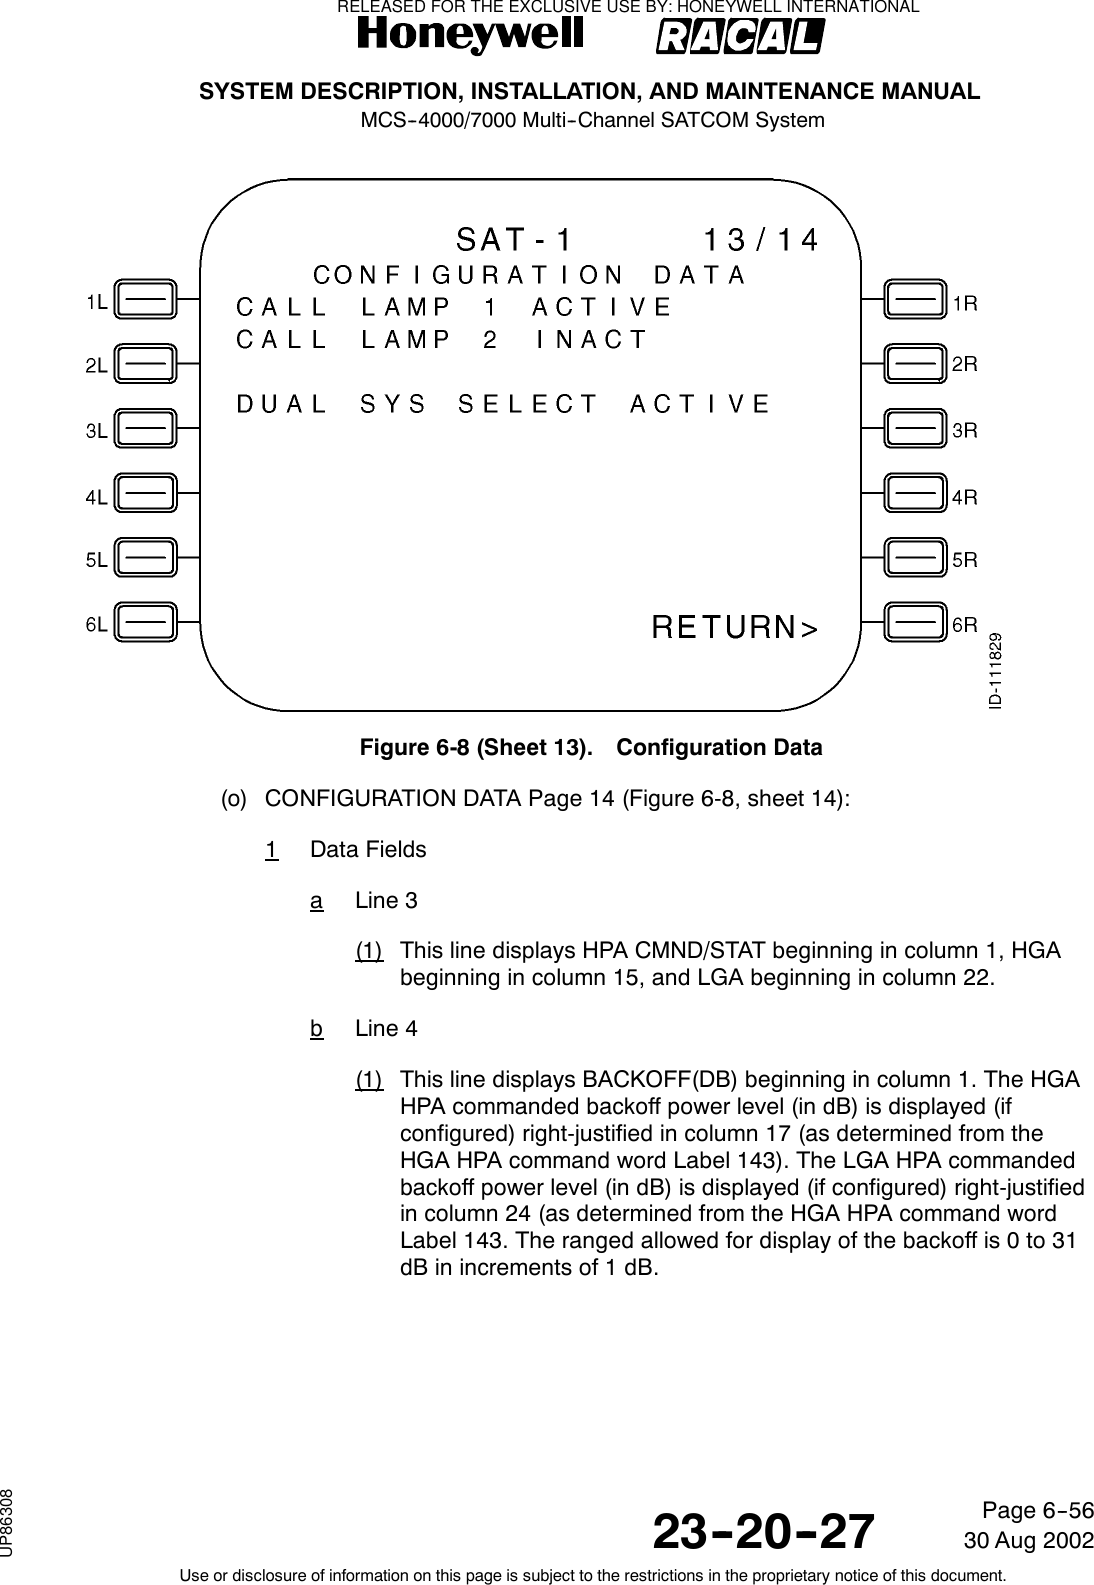 SYSTEM DESCRIPTION, INSTALLATION, AND MAINTENANCE MANUALMCS--4000/7000 Multi--Channel SATCOM System23--20--2730 Aug 2002Use or disclosure of information on this page is subject to the restrictions in the proprietary notice of this document.Page 6--56Figure 6-8 (Sheet 13). Configuration Data(o) CONFIGURATION DATA Page 14 (Figure 6-8, sheet 14):1Data FieldsaLine 3(1) This line displays HPA CMND/STAT beginning in column 1, HGAbeginning in column 15, and LGA beginning in column 22.bLine 4(1) This line displays BACKOFF(DB) beginning in column 1. The HGAHPA commanded backoff power level (in dB) is displayed (ifconfigured) right-justified in column 17 (as determined from theHGA HPA command word Label 143). The LGA HPA commandedbackoff power level (in dB) is displayed (if configured) right-justifiedin column 24 (as determined from the HGA HPA command wordLabel 143. The ranged allowed for display of the backoff is 0 to 31dB in increments of 1 dB.RELEASED FOR THE EXCLUSIVE USE BY: HONEYWELL INTERNATIONALUP86308